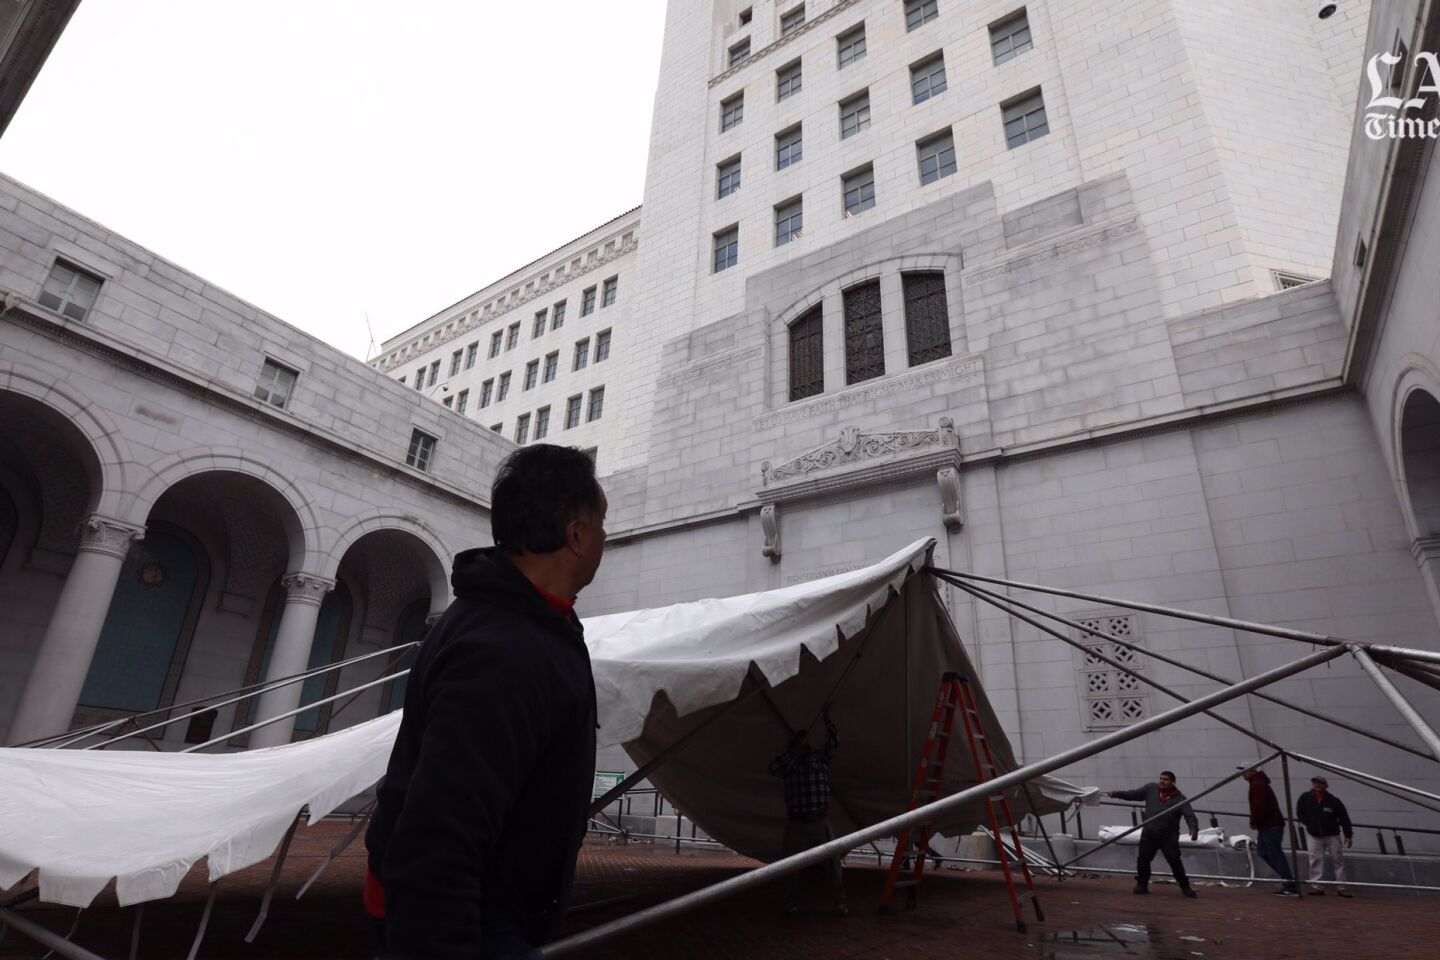 A large tent is installed for public attendance at Tuesday’s Los Angeles City Council meeting. The public was not allowed in the council chamber.